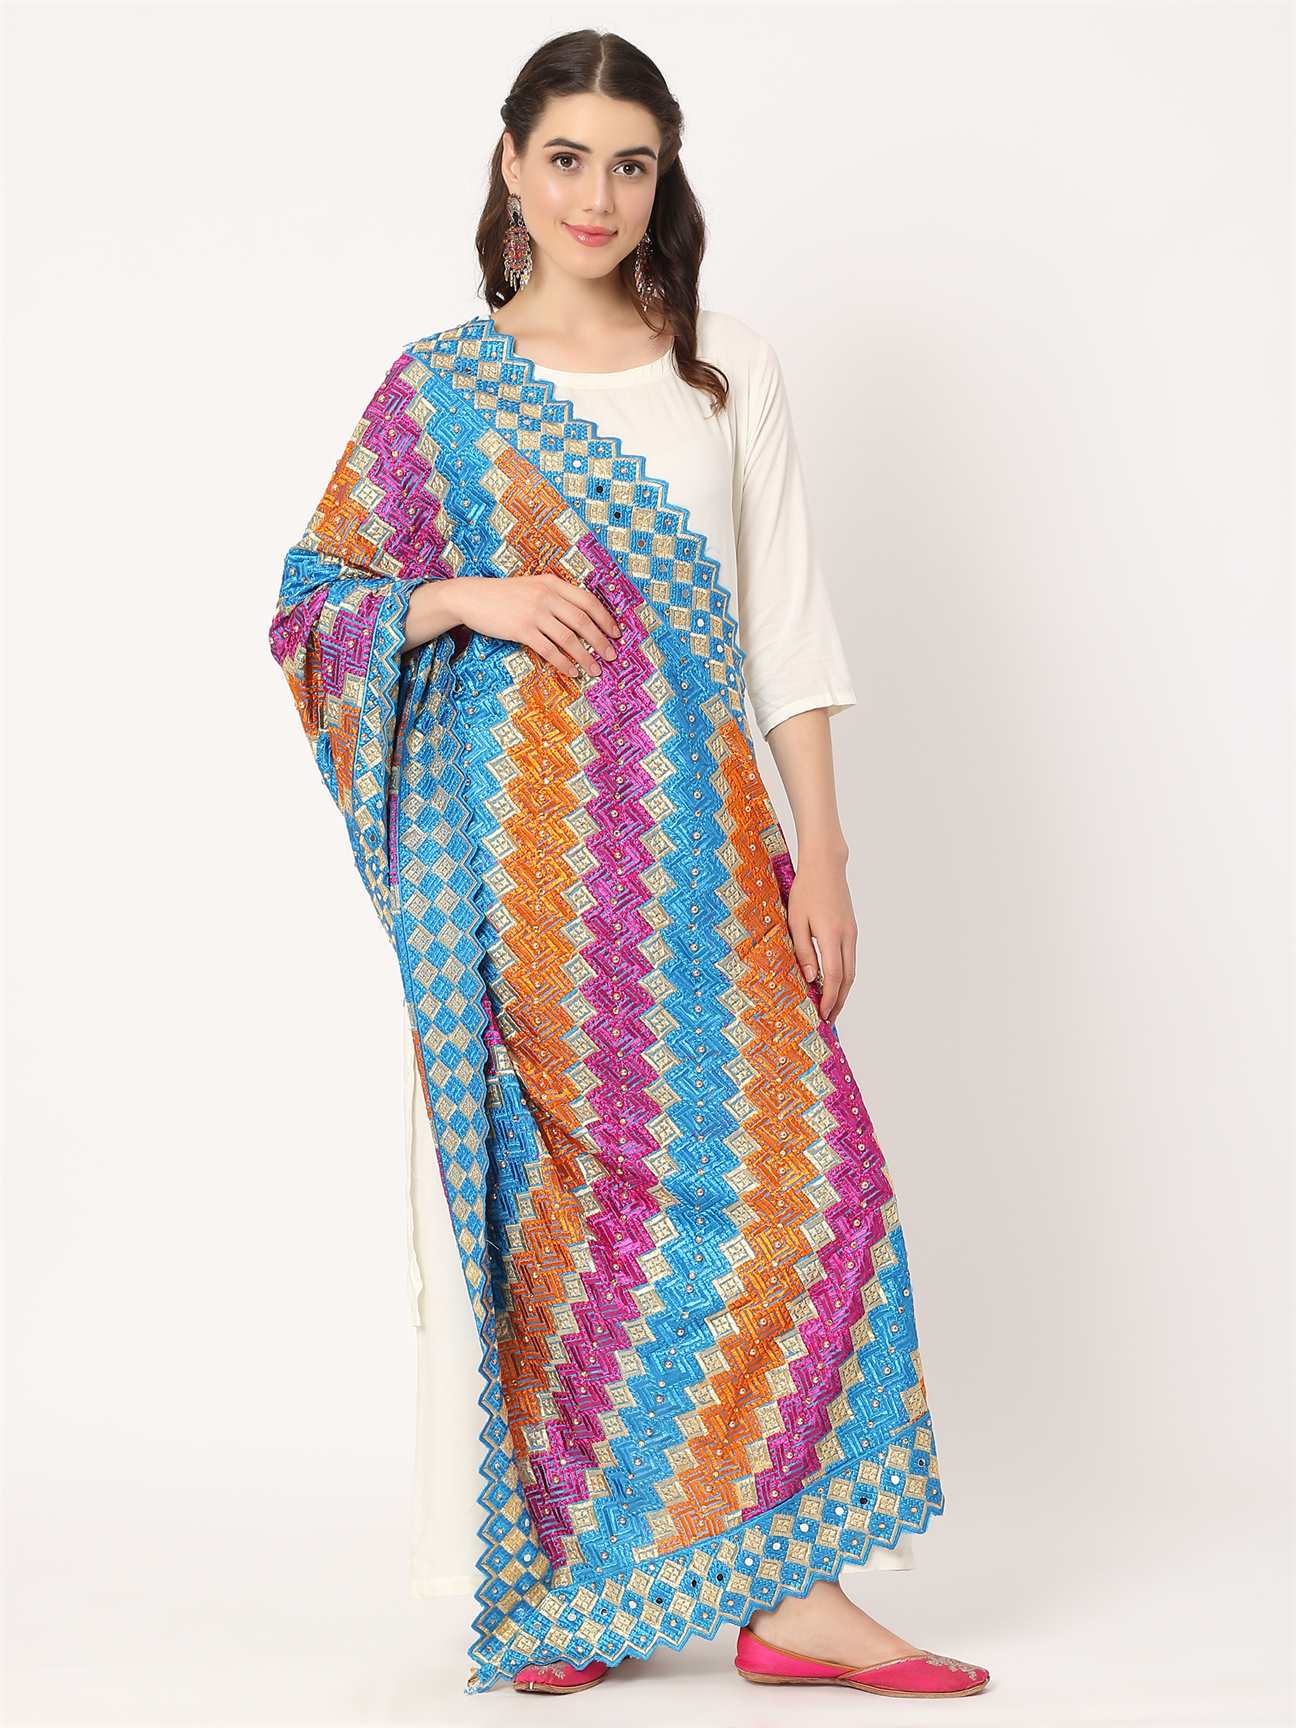 royal-blue-mullticolour-embroidery-phulkari-dupatta-with-beads-and-pearl-MCRCPD0206